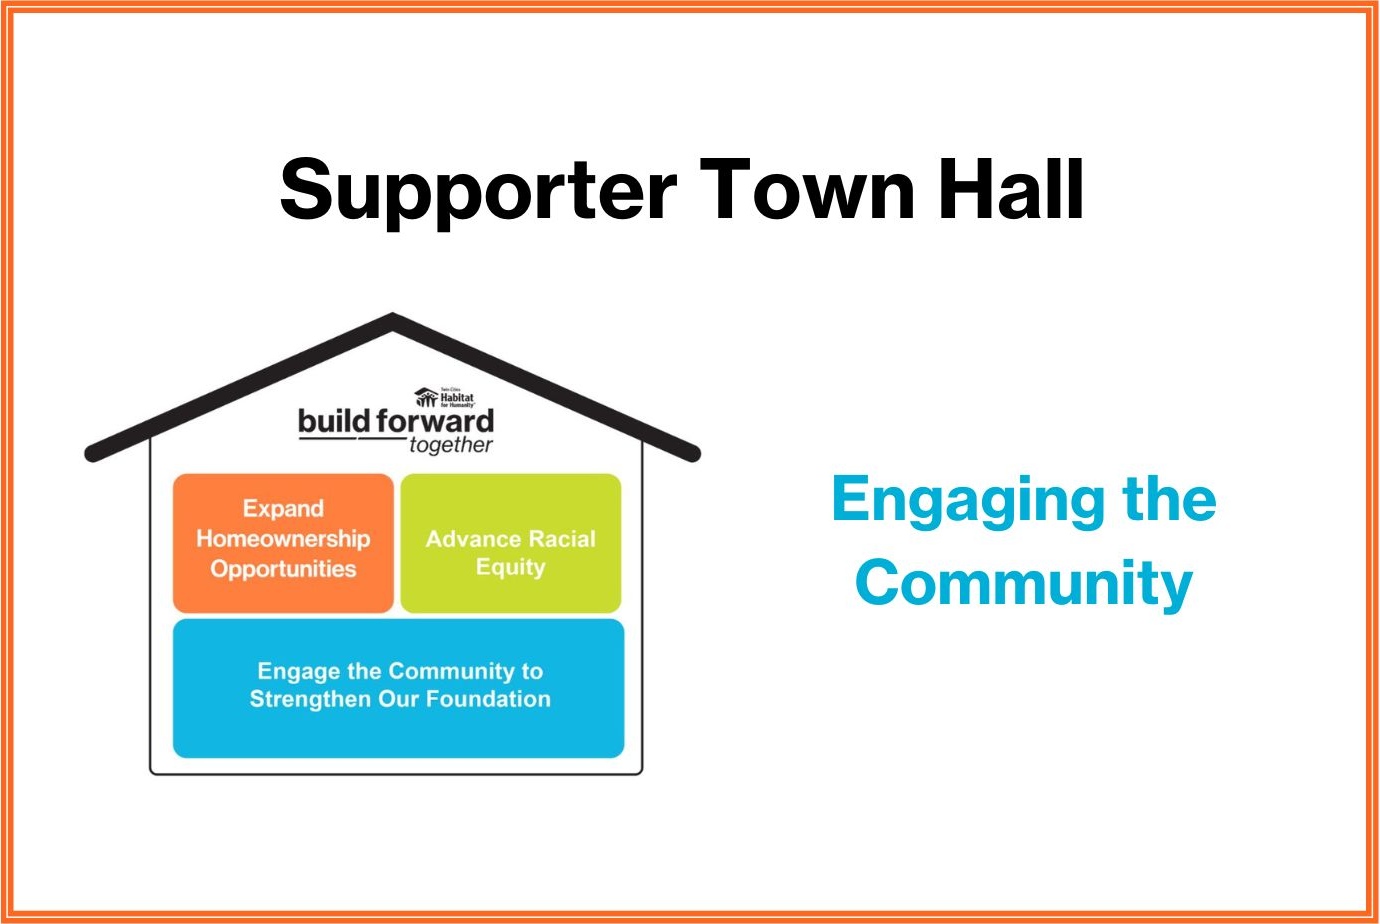 Supporter Town Hall Recap: Engaging the Community